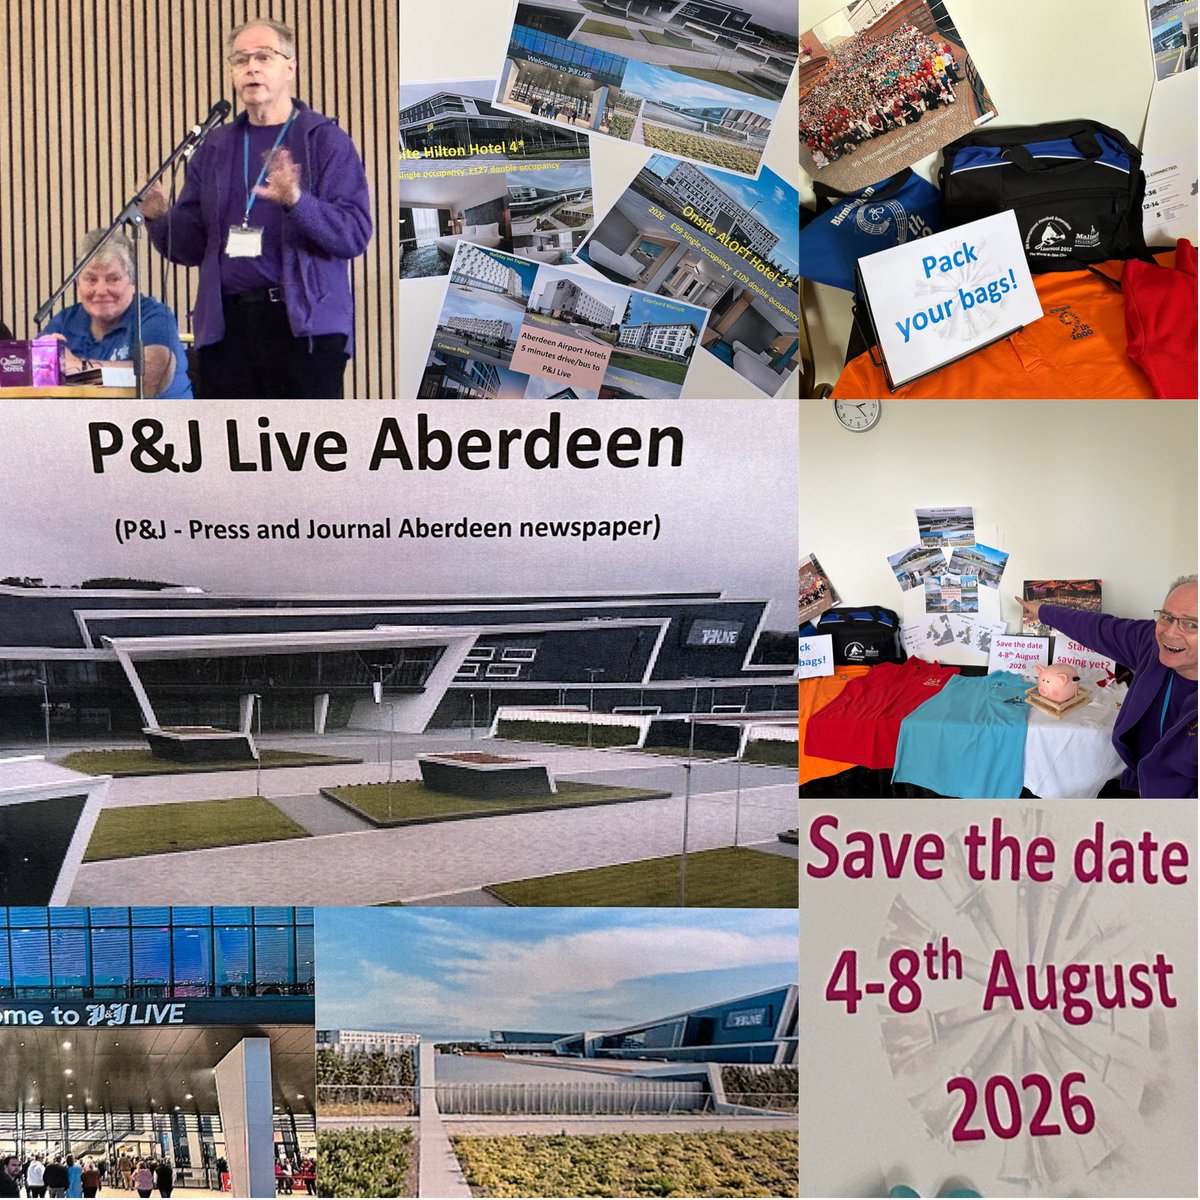 Today at HRGB AGM, Martin Winter announced the change of location for the 2026 International Handbell Symposium hosted by HRGB, which will now be held in Aberdeen's state-of-the-art events complex, P&J Live, in the North East of Scotland. So save the dates now: 4-8 August 2026